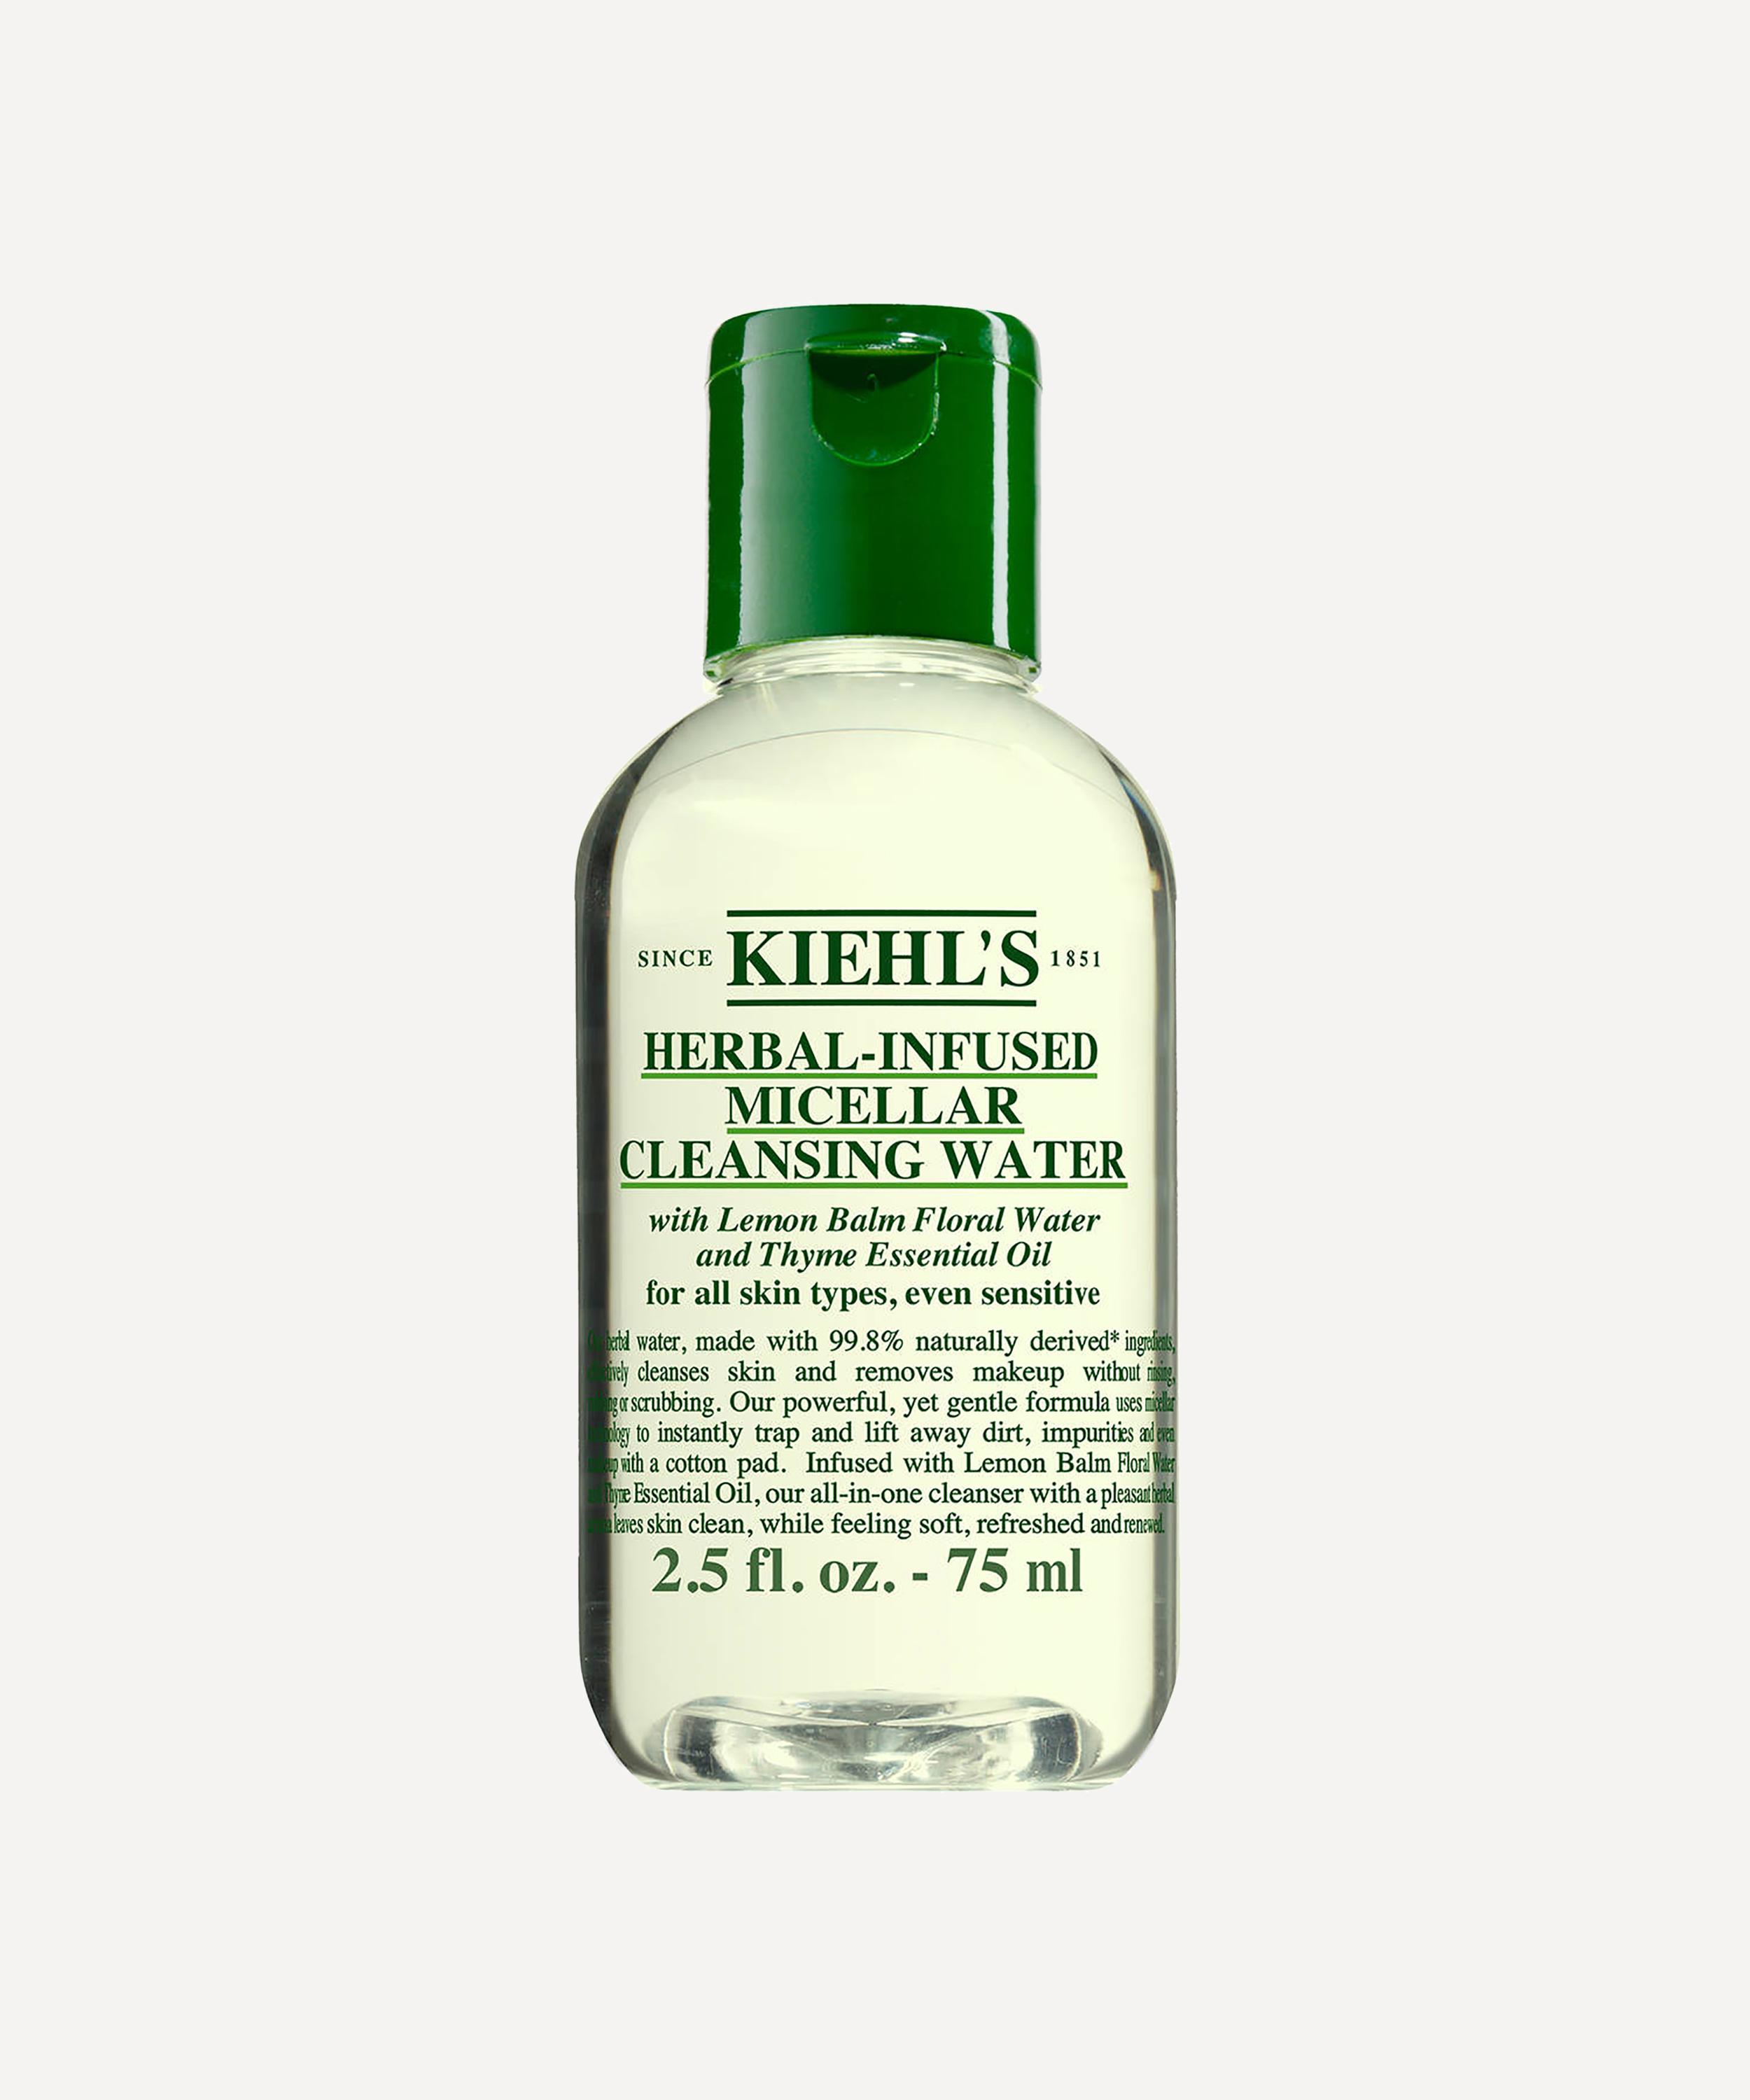 Water cleanser. Килс мицеллярная вода. Kiehl's cucumber Herbal conditioning Cleanser этикетка. Kiehls мицеллярная вода. Мицеллярная вода от Хербал.